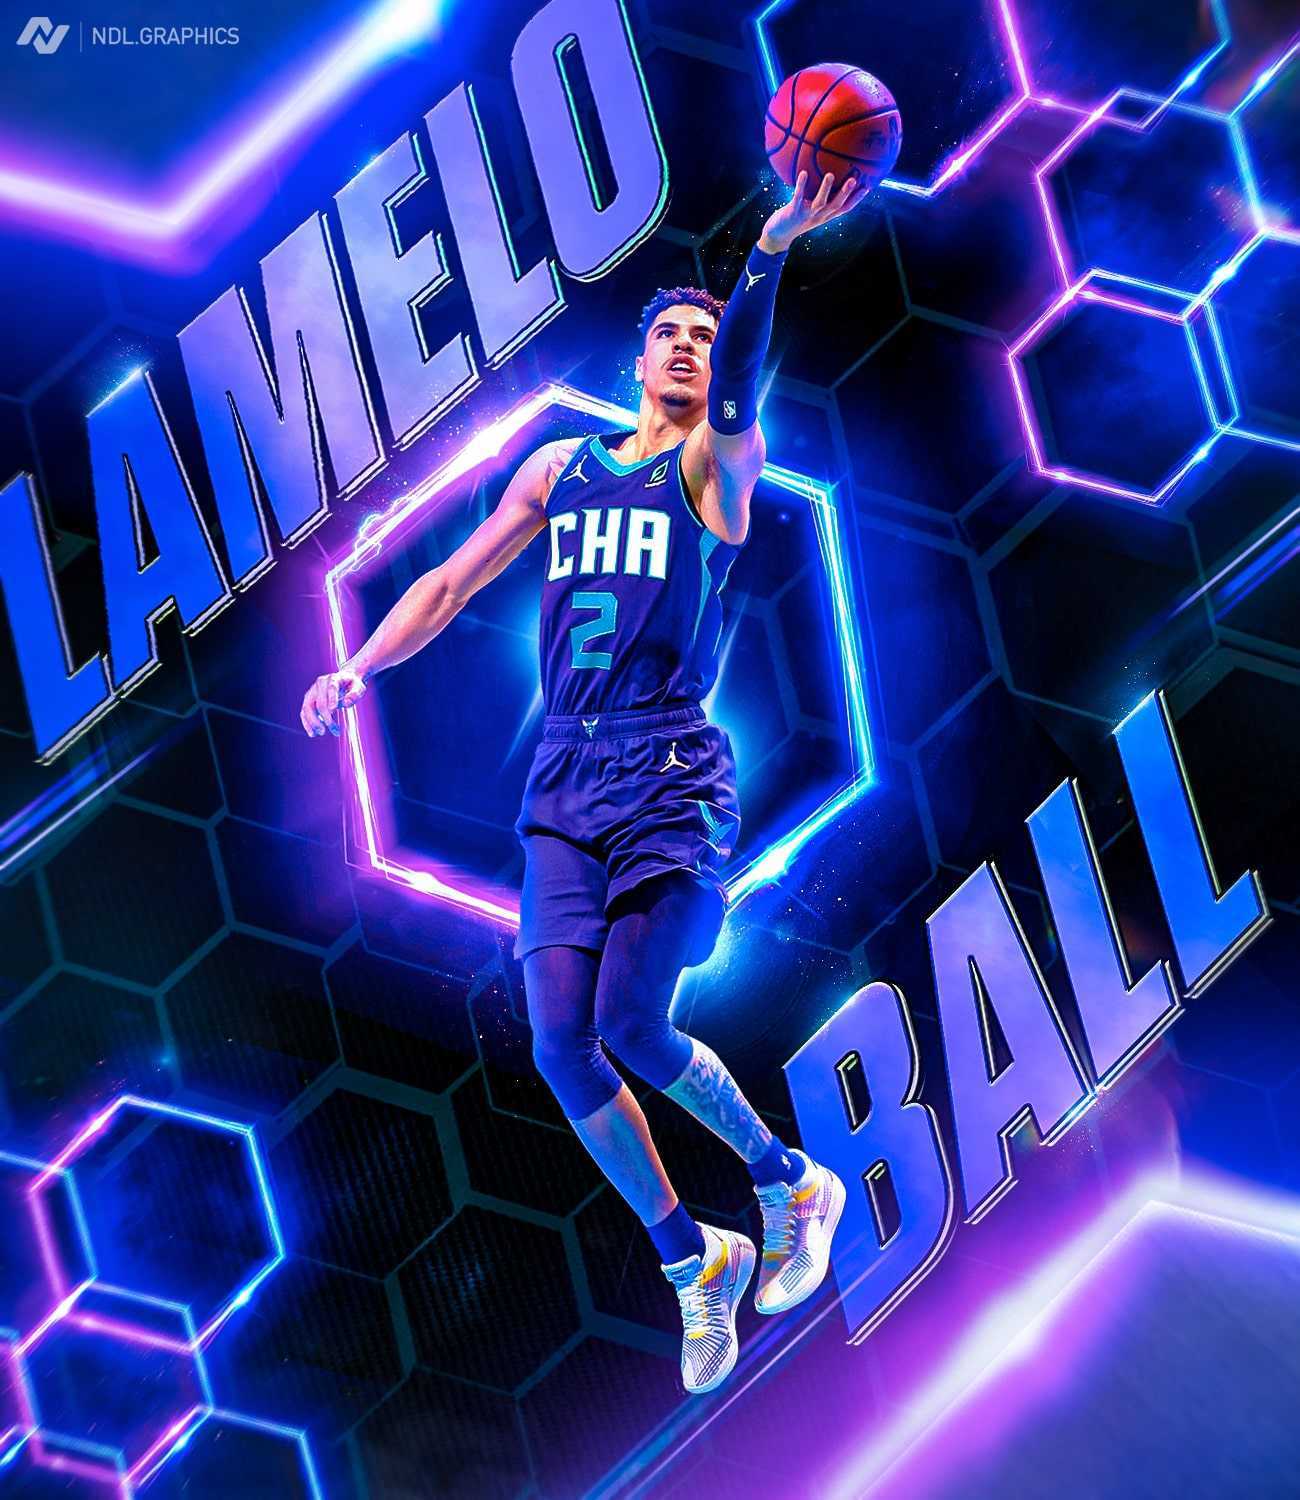 LaMelo Ball Wallpaper 4k APK for Android Download